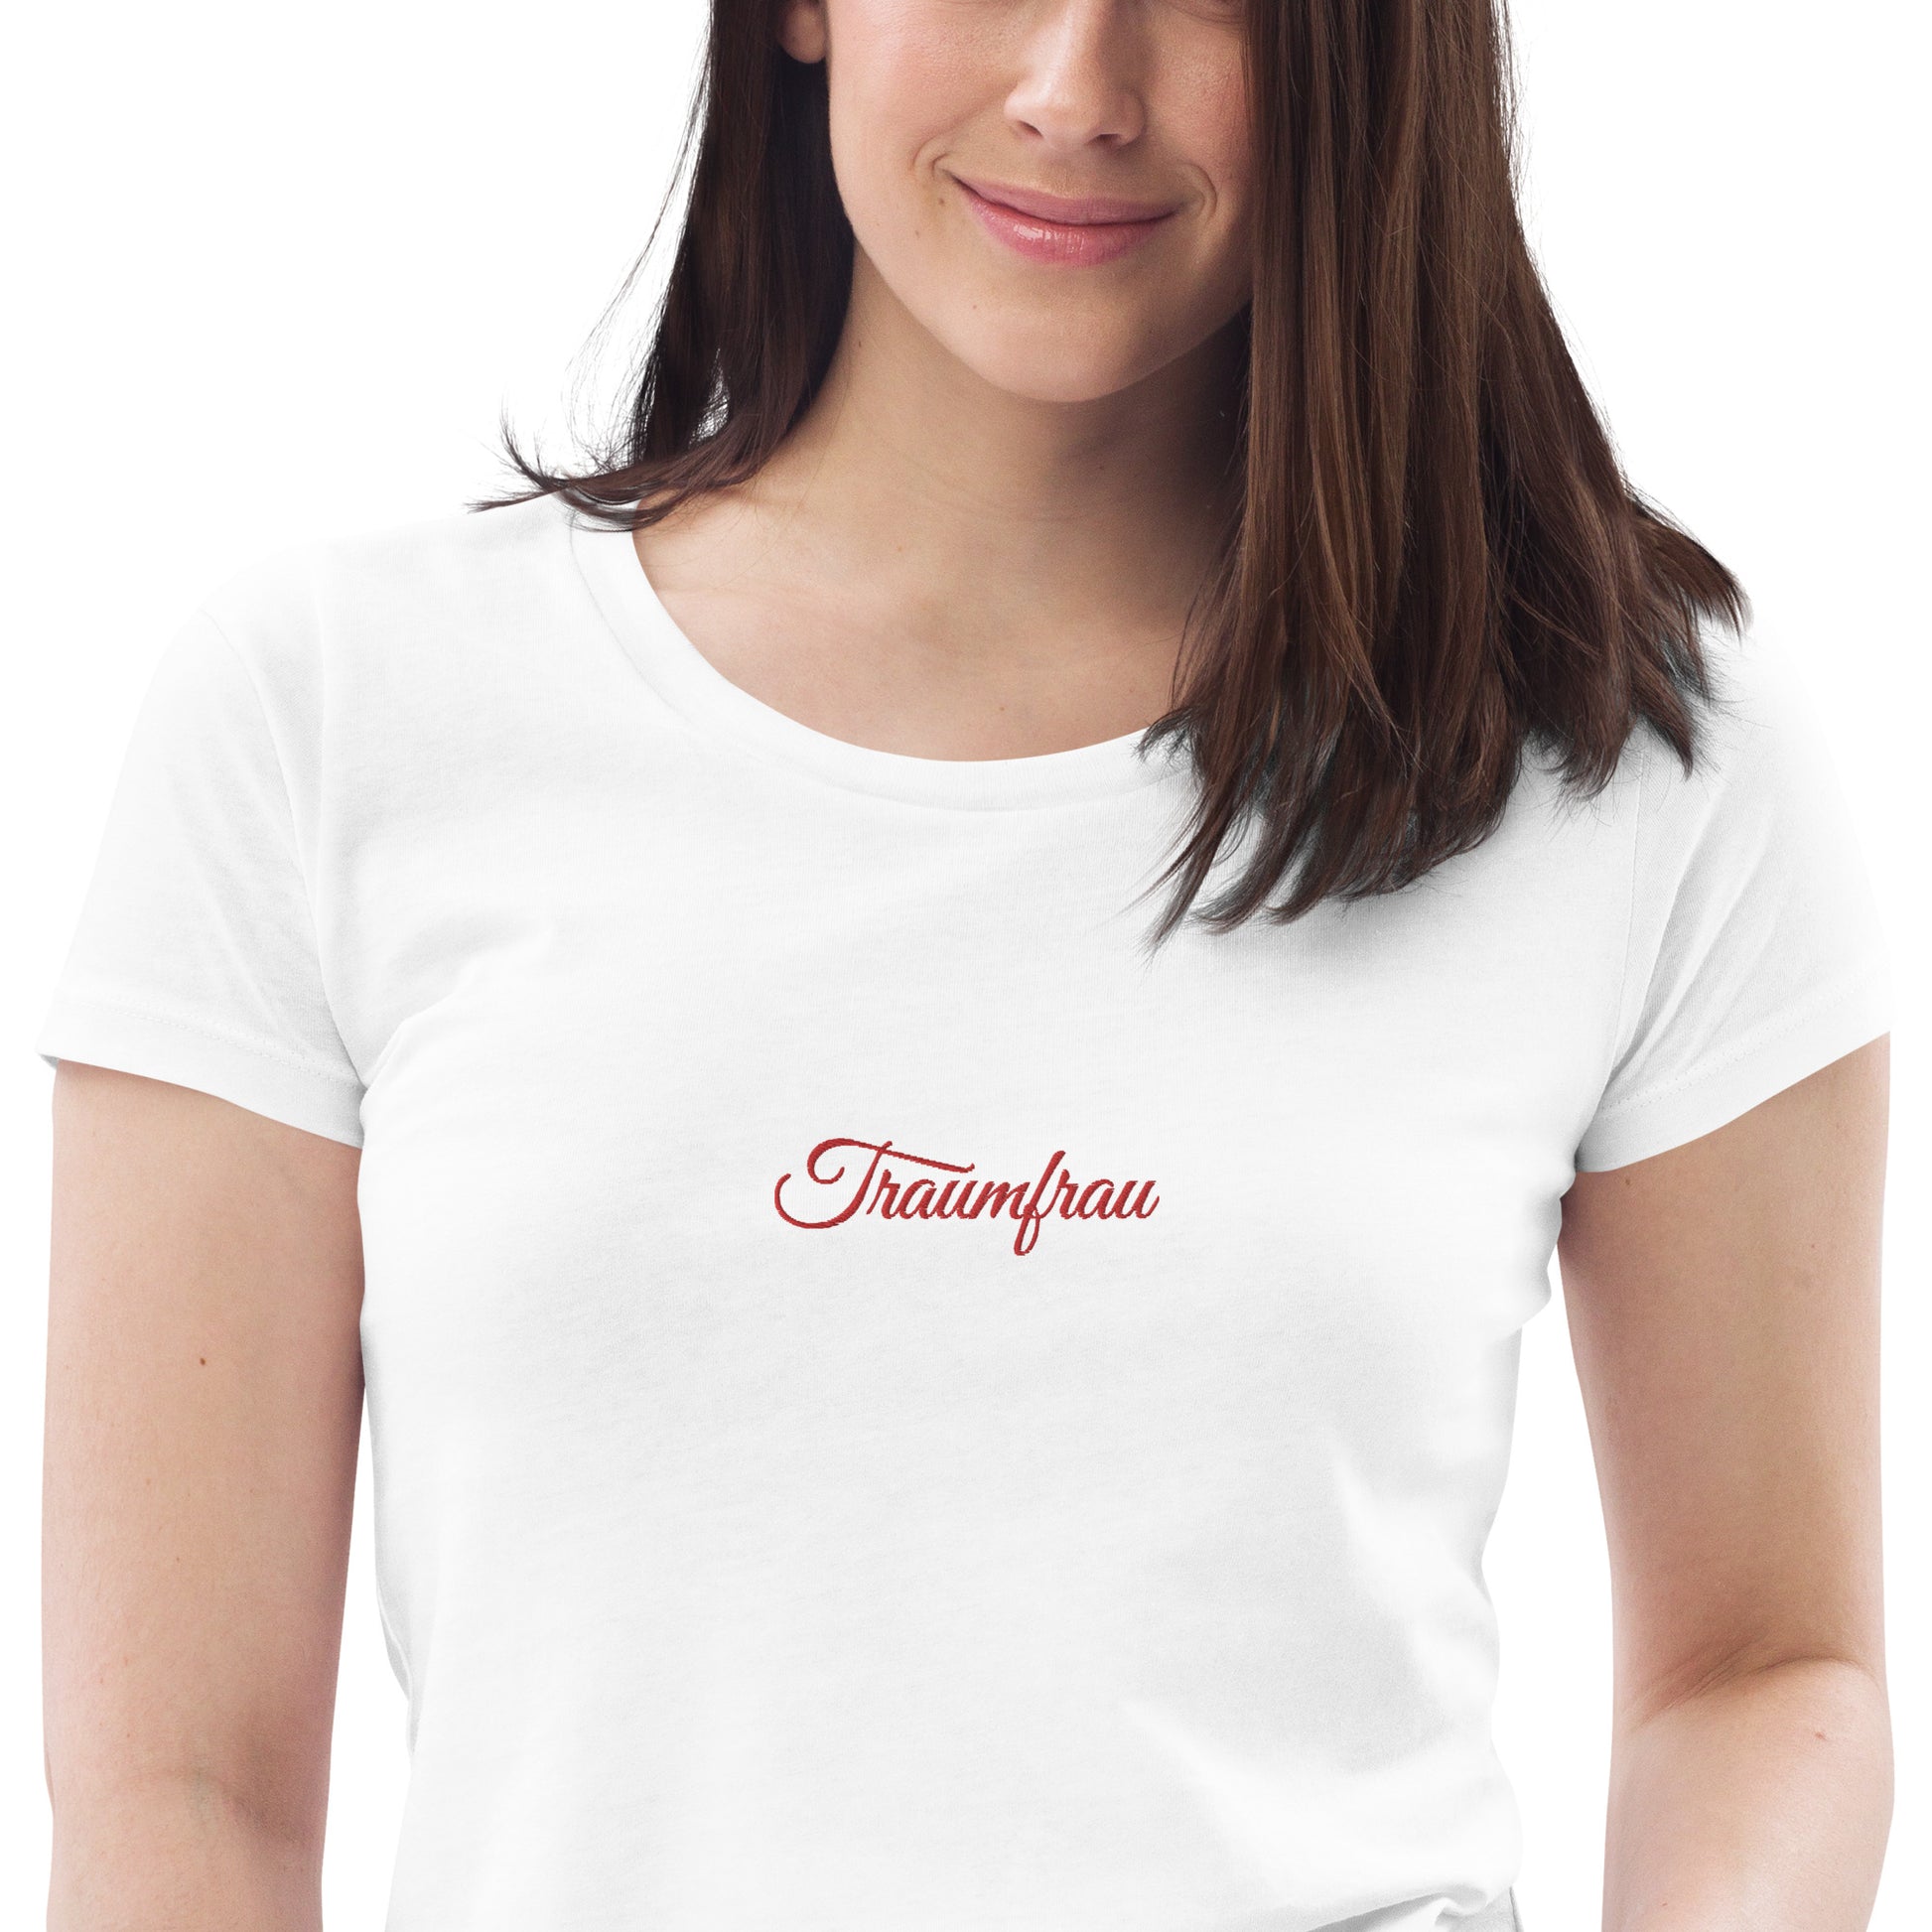 TIME OF VIBES Women's fitted eco tee TRAUMFRAU (White/Pink) - €34.00